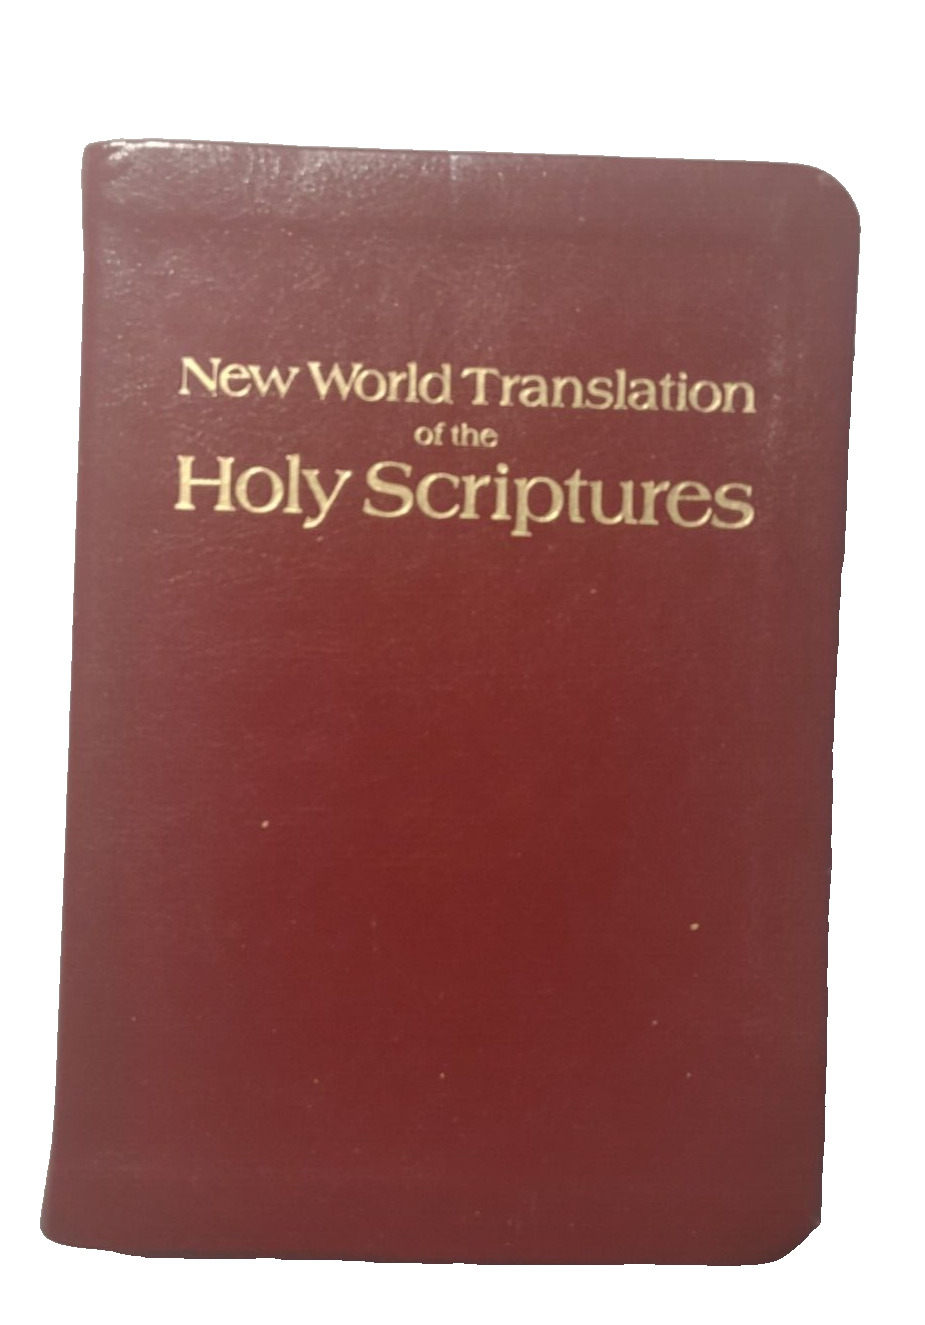 Watchtower Jehovah Witness New World Translation Of The Holy Scriptures 6624